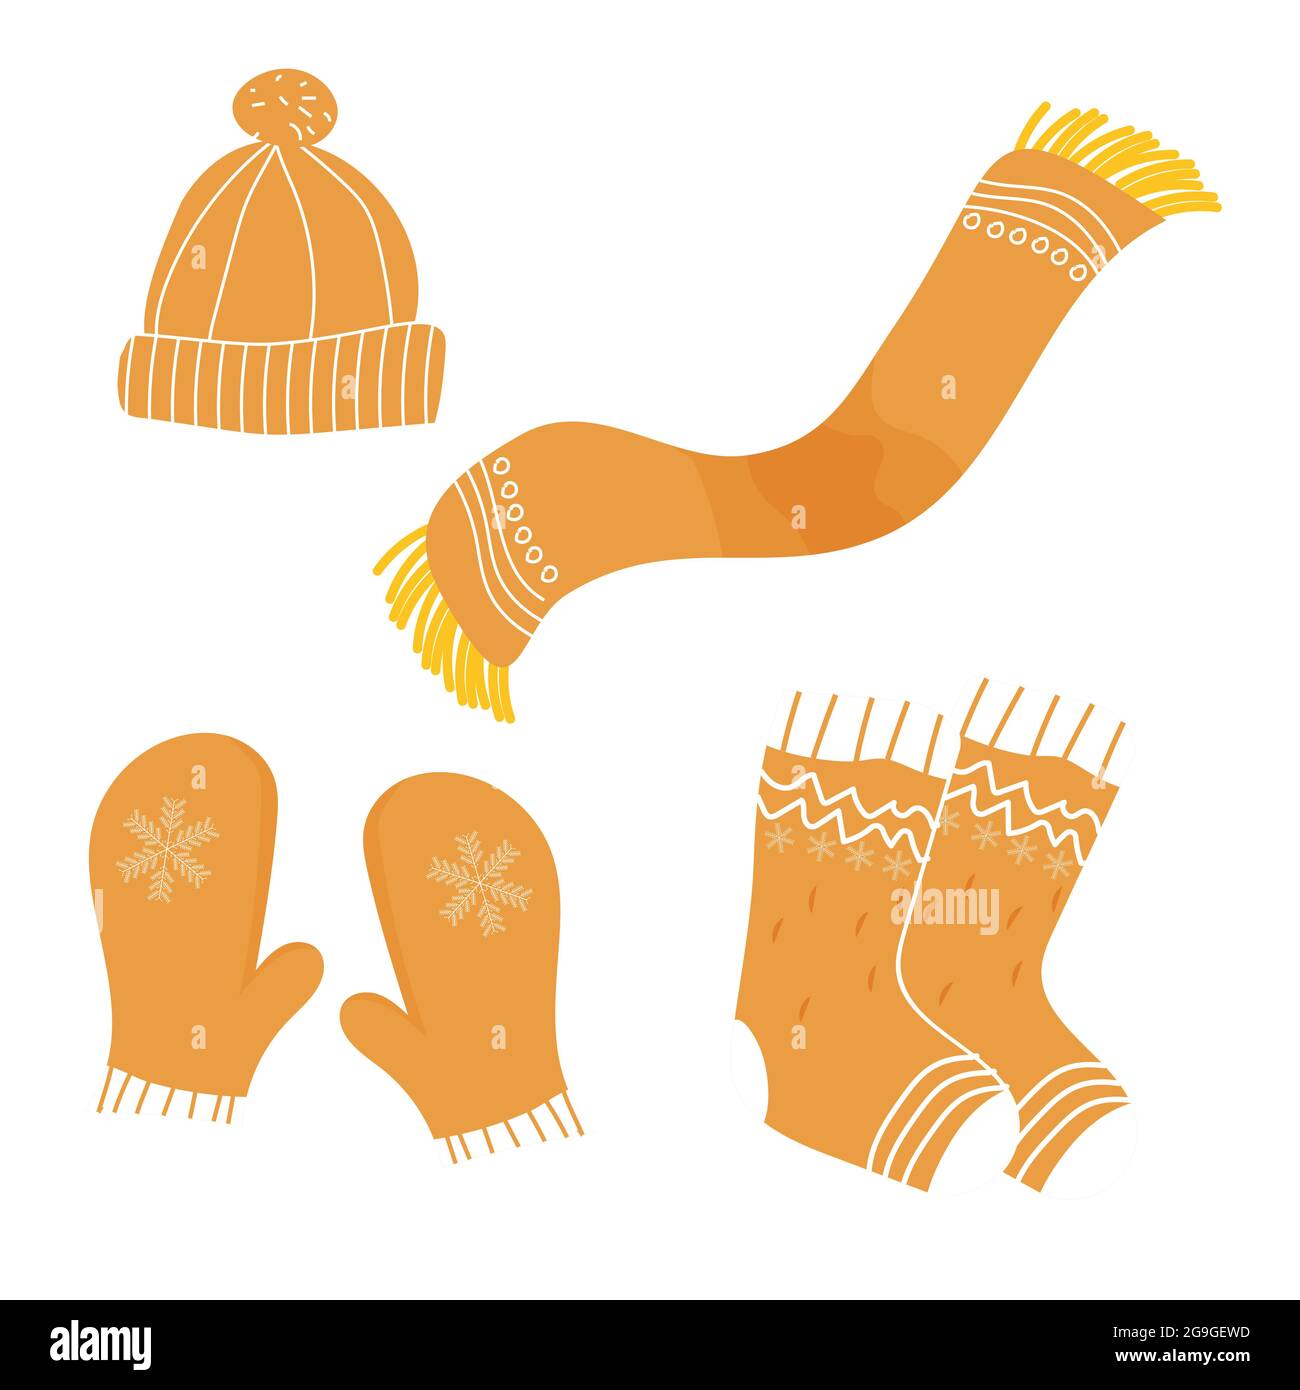 The Vector Set Of Winter Clothes Coats Hats Gloves Shoes And Socks